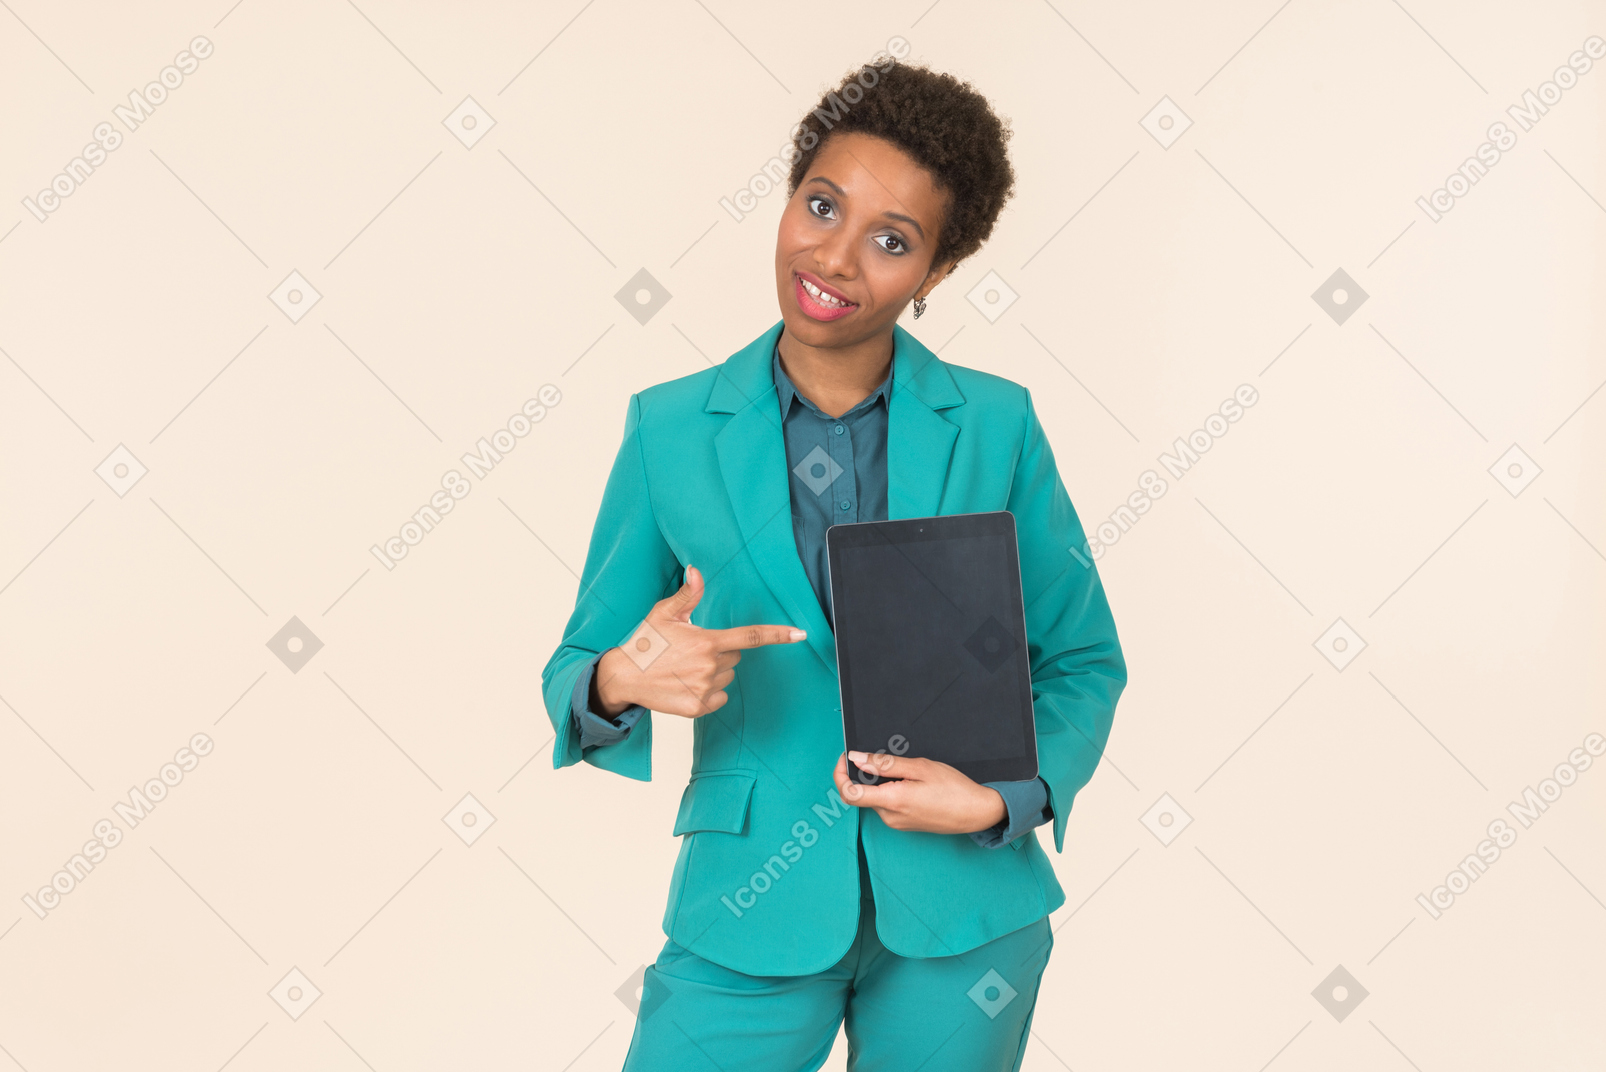 Young black woman with a short haircut, posing in a blue outfit with a tablet in her hand